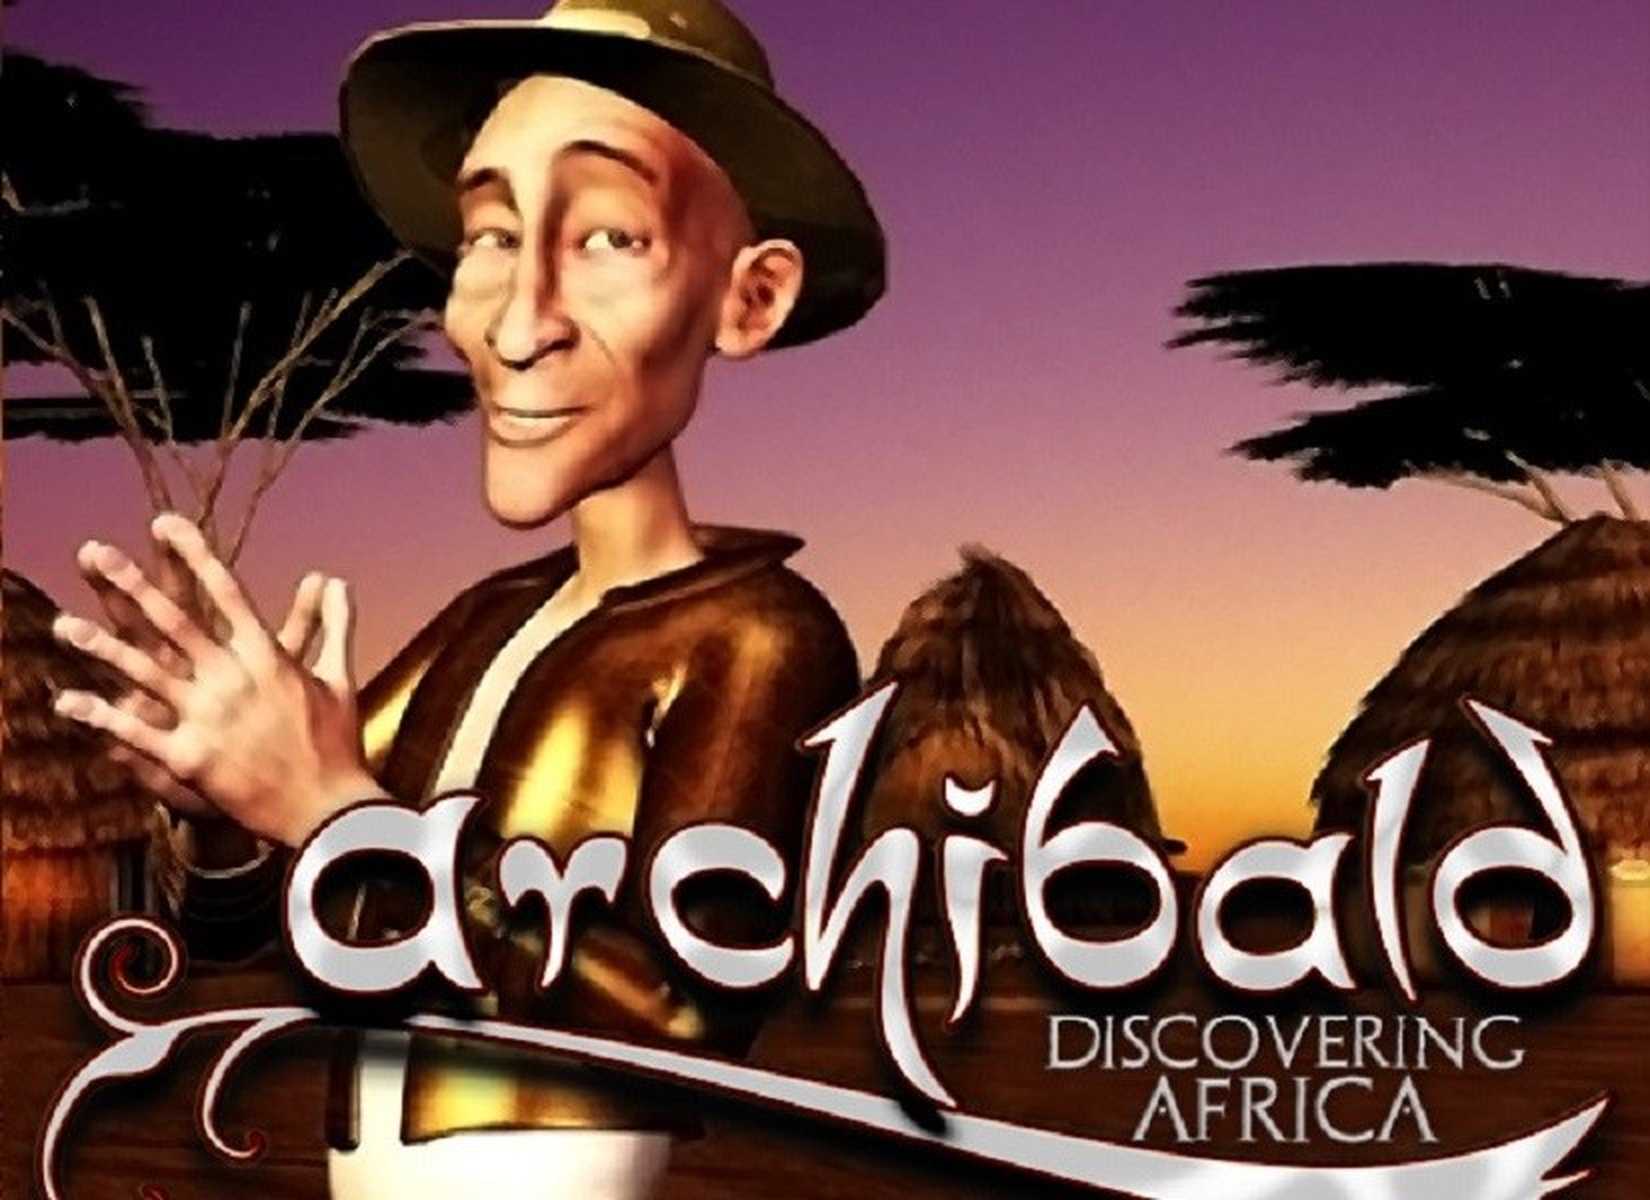 Archibald Discovering Africa HD demo